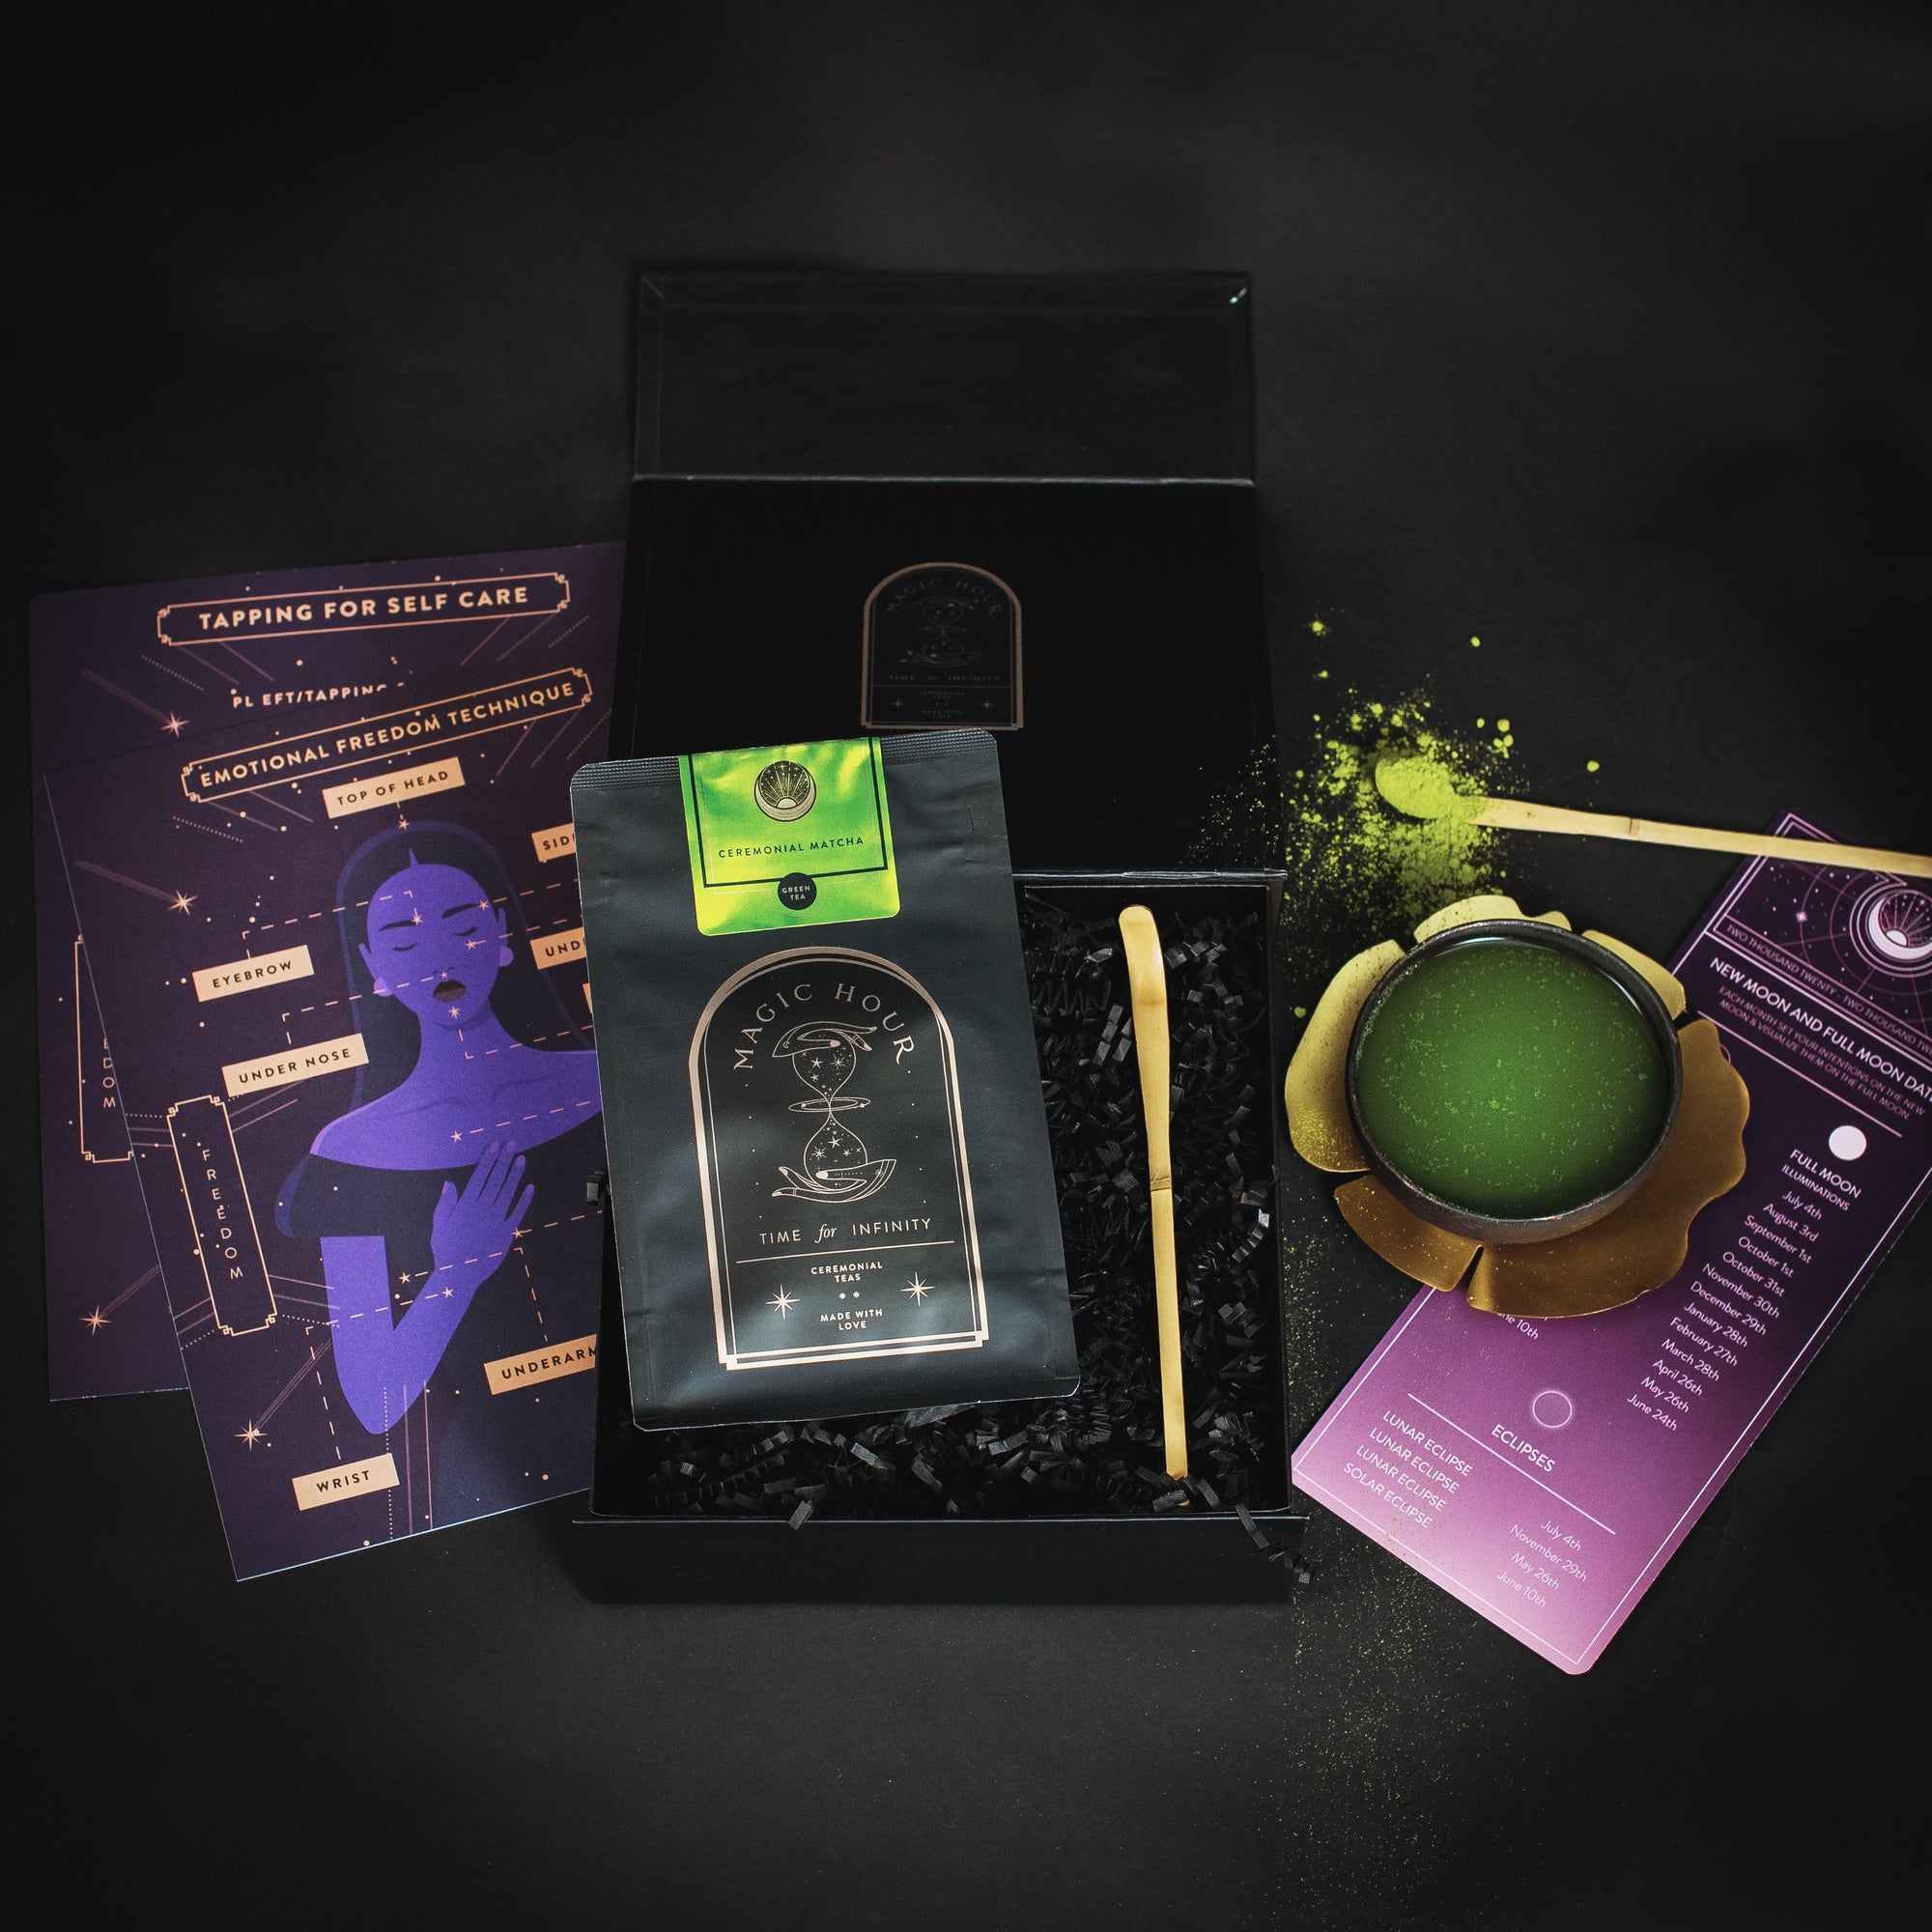 A flat lay of a black box containing a tea package labeled "Ceremonial Matcha Freedom Box by Magic Hour," a ceramic cup with green tea powder, a gold spoon, and informational pamphlets. The items are arranged artfully on a black background with loose leaf tea and green tea powder scattered around.